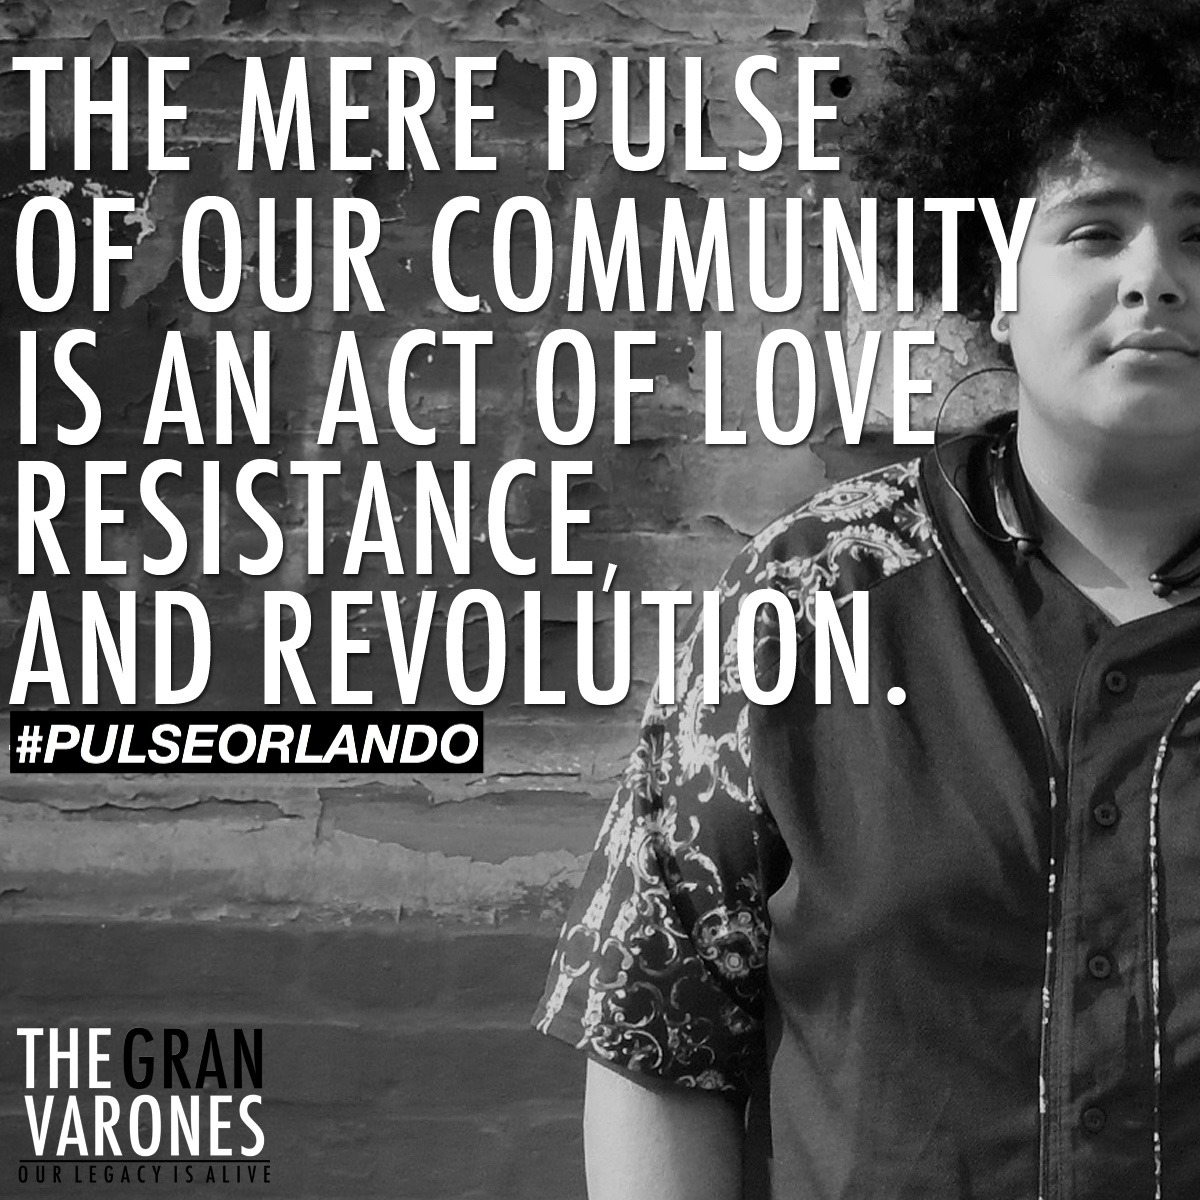 sanctuary is found on the dance floor. spirits are filled and pain is paused. know that last night’s attack at pulse night club in orlando, during latino night - is an yet ANOTHER attack on all of us who have ever feared loving openly in public.
as...